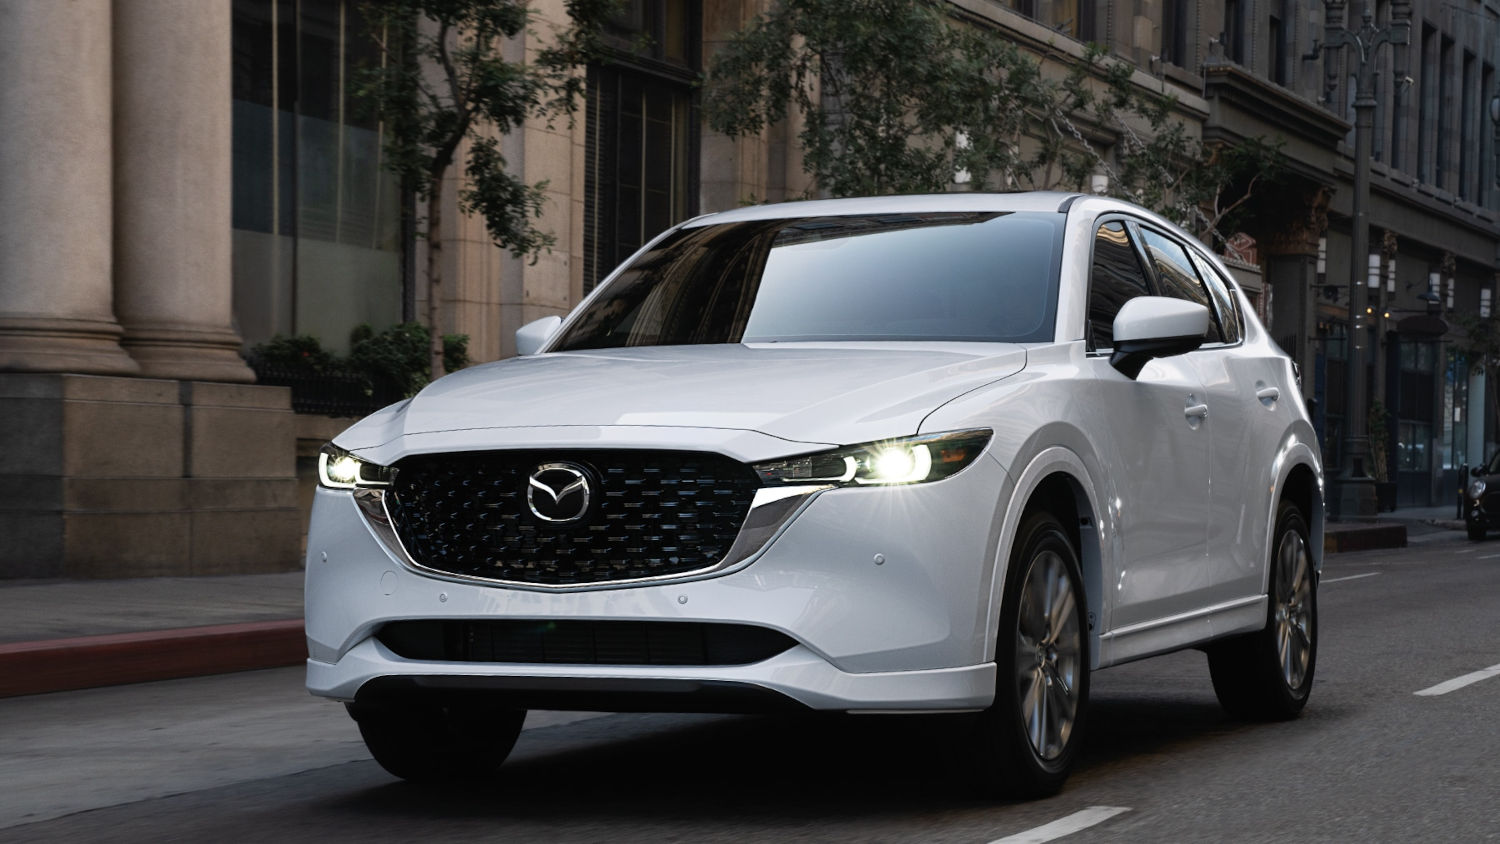 This affordable small SUV is Mazda's CX-5 in white